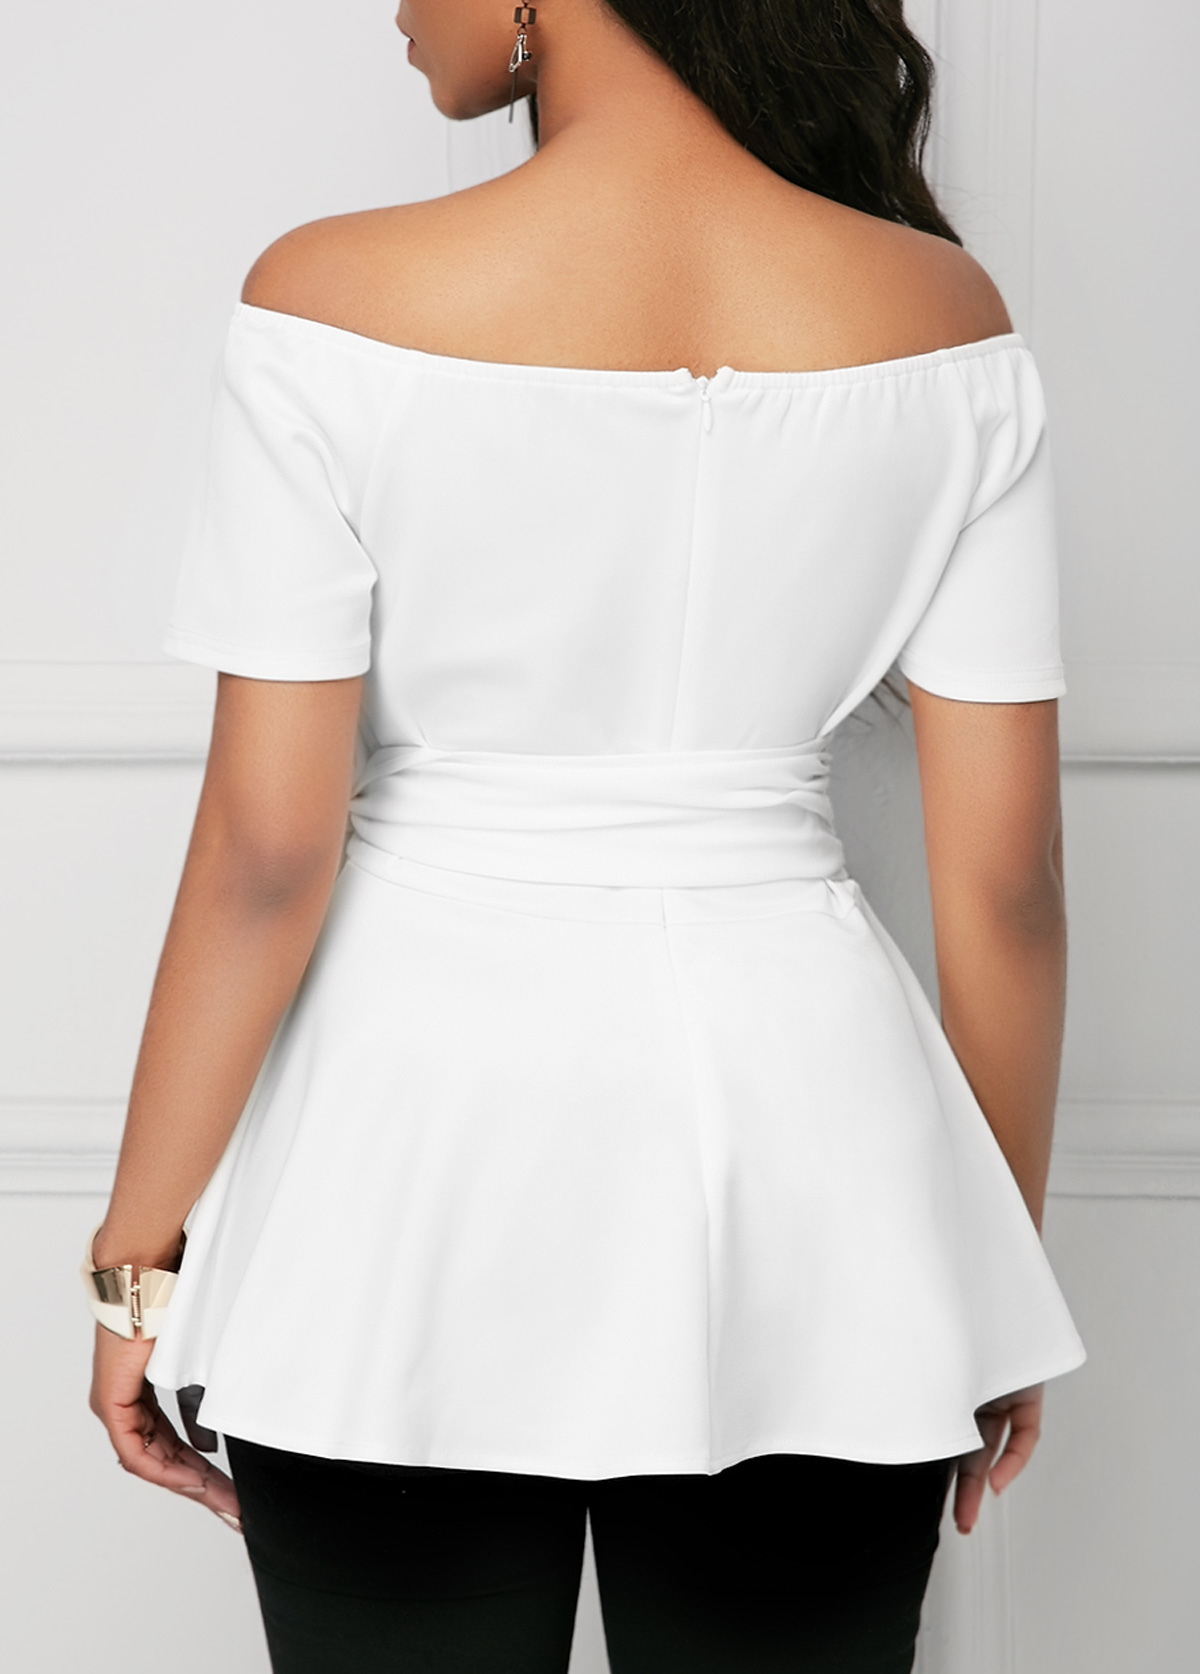 Tie Side Off the Shoulder White Blouse